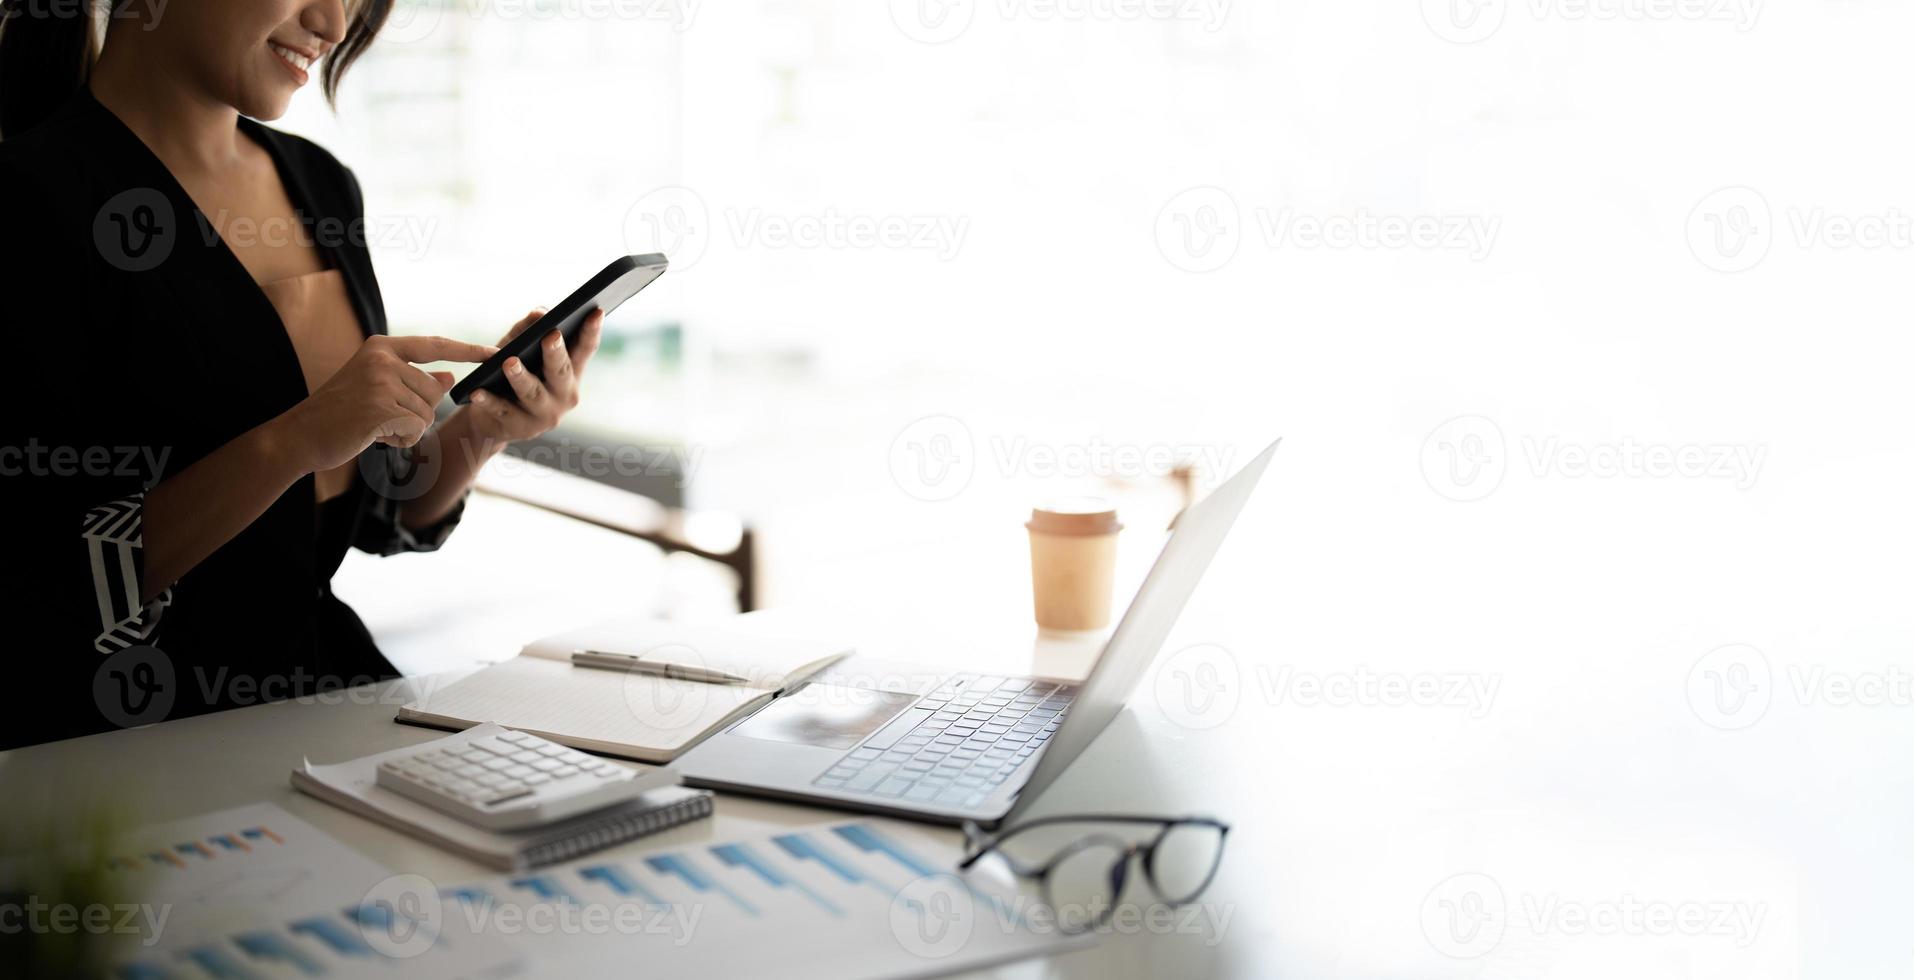 Asian woman holding smart phone while using calculator and laptop for business financial accounting calculate money bank loan rent payments manage expenses finances taxes doing paperwork concept photo